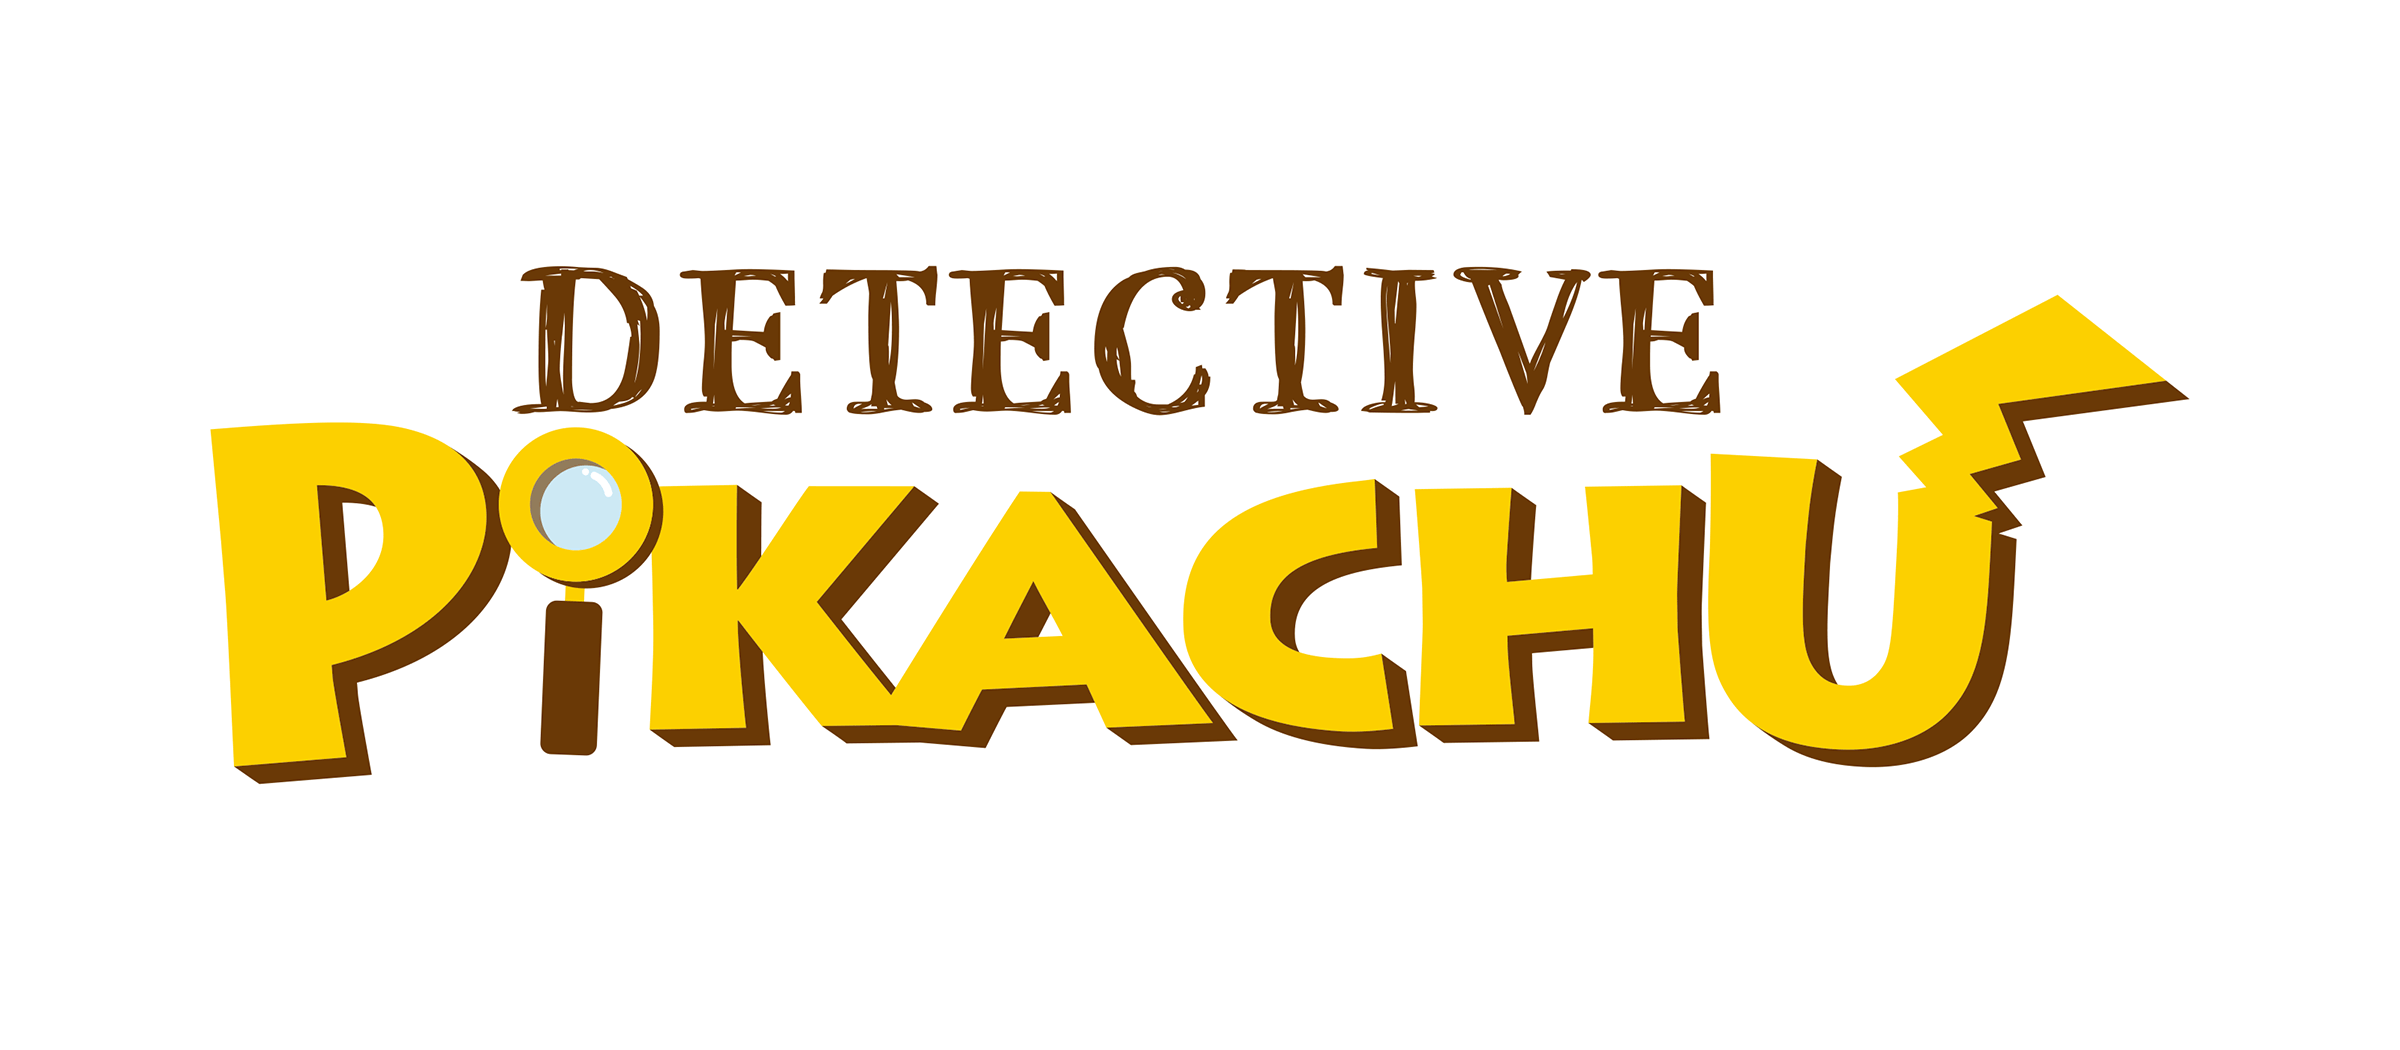 Detective Pikachu Wallpaper and Background Imagex1050